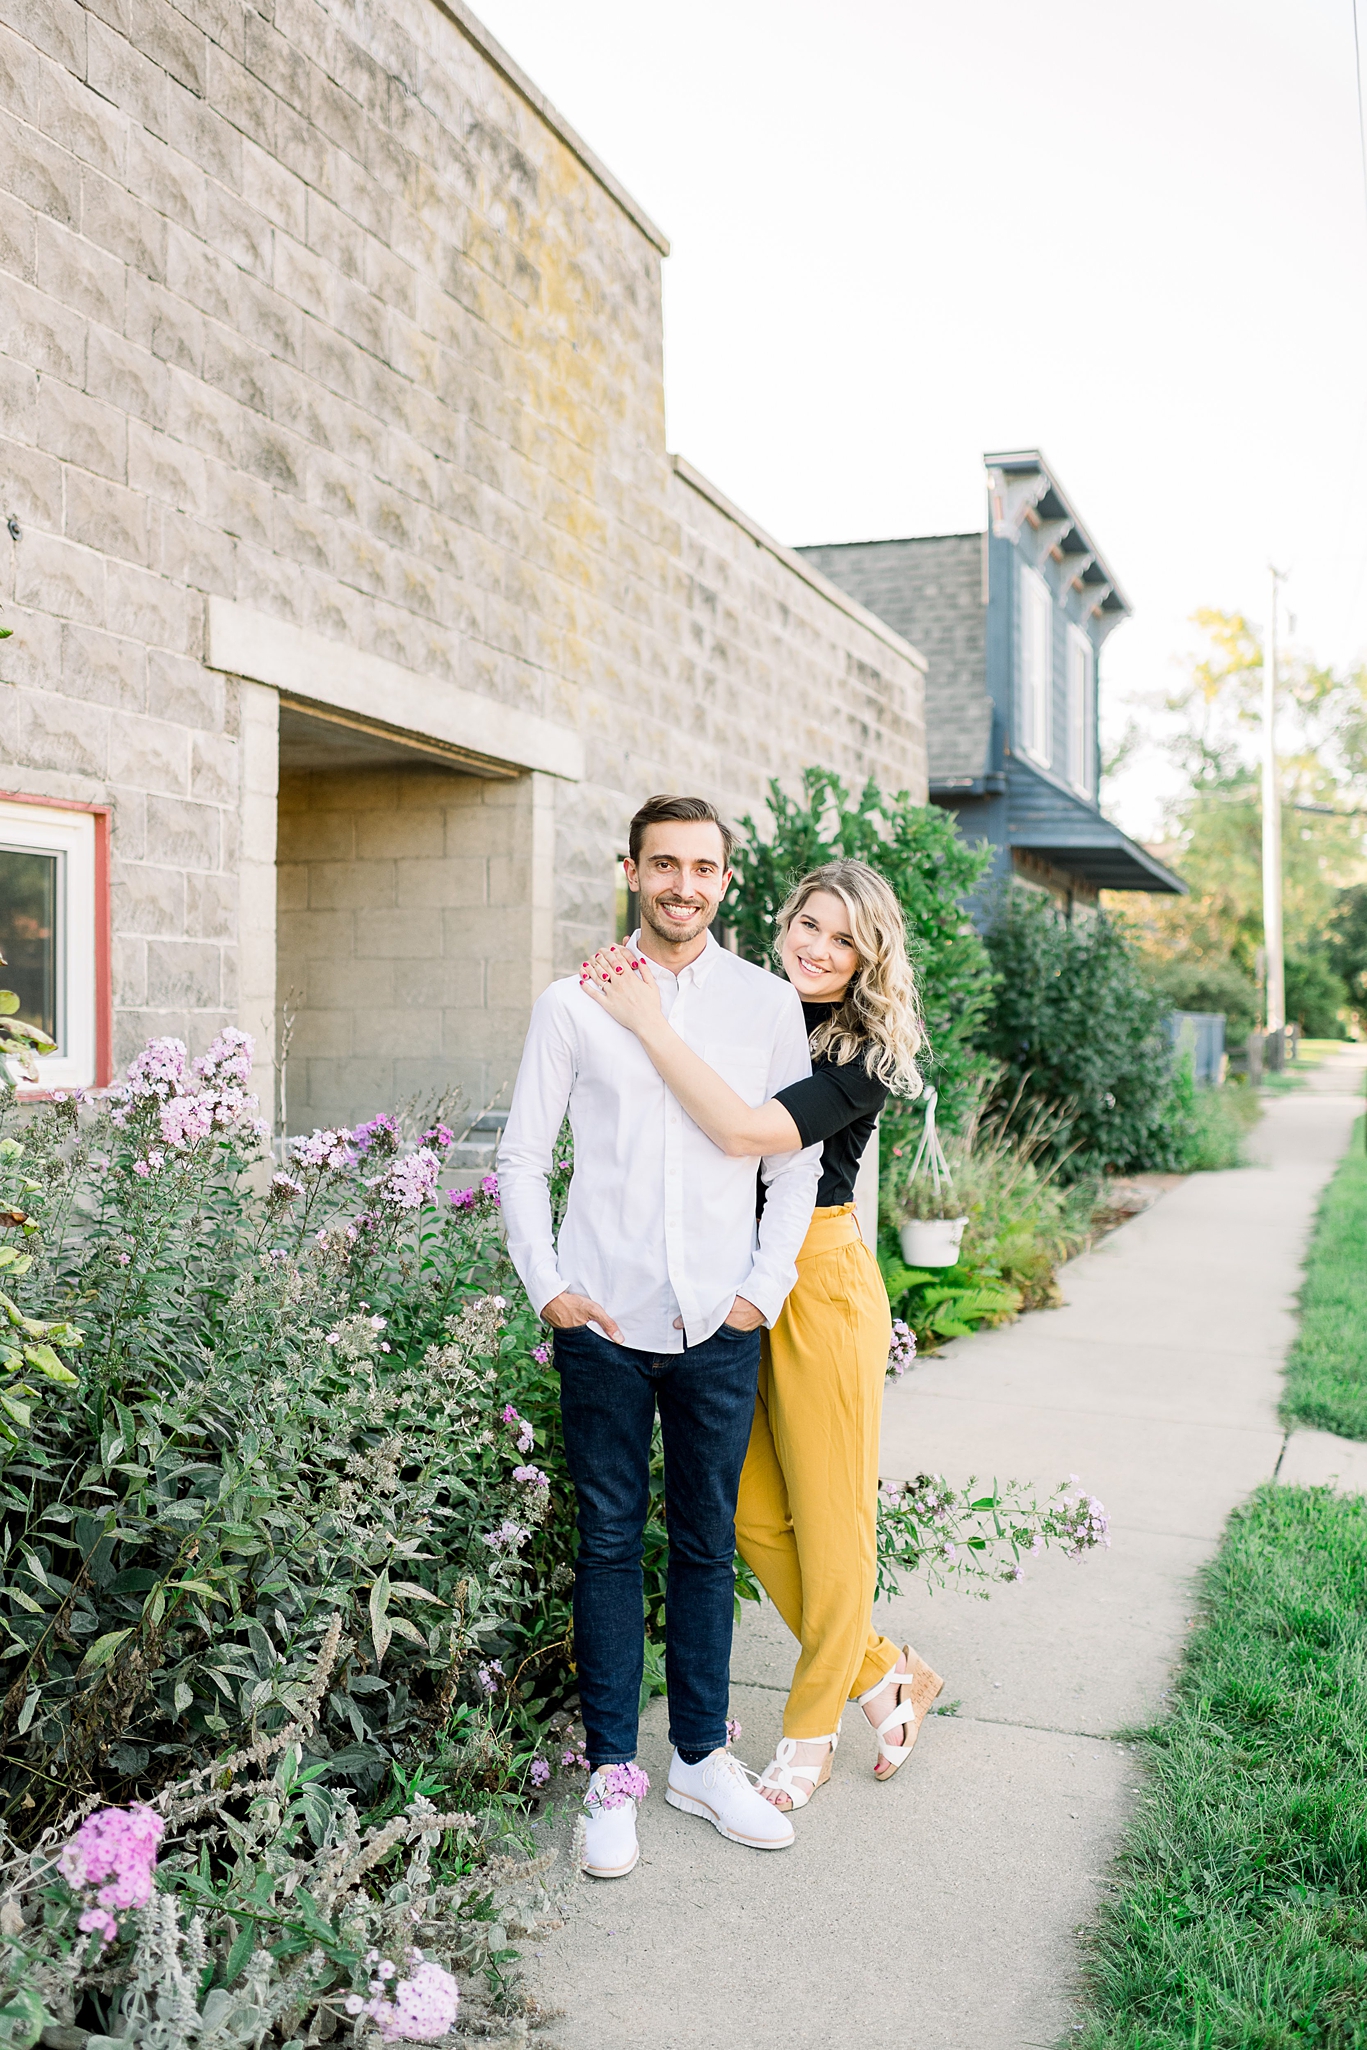 Spring Green, WI Engagement Photographers - Larissa Marie Photography